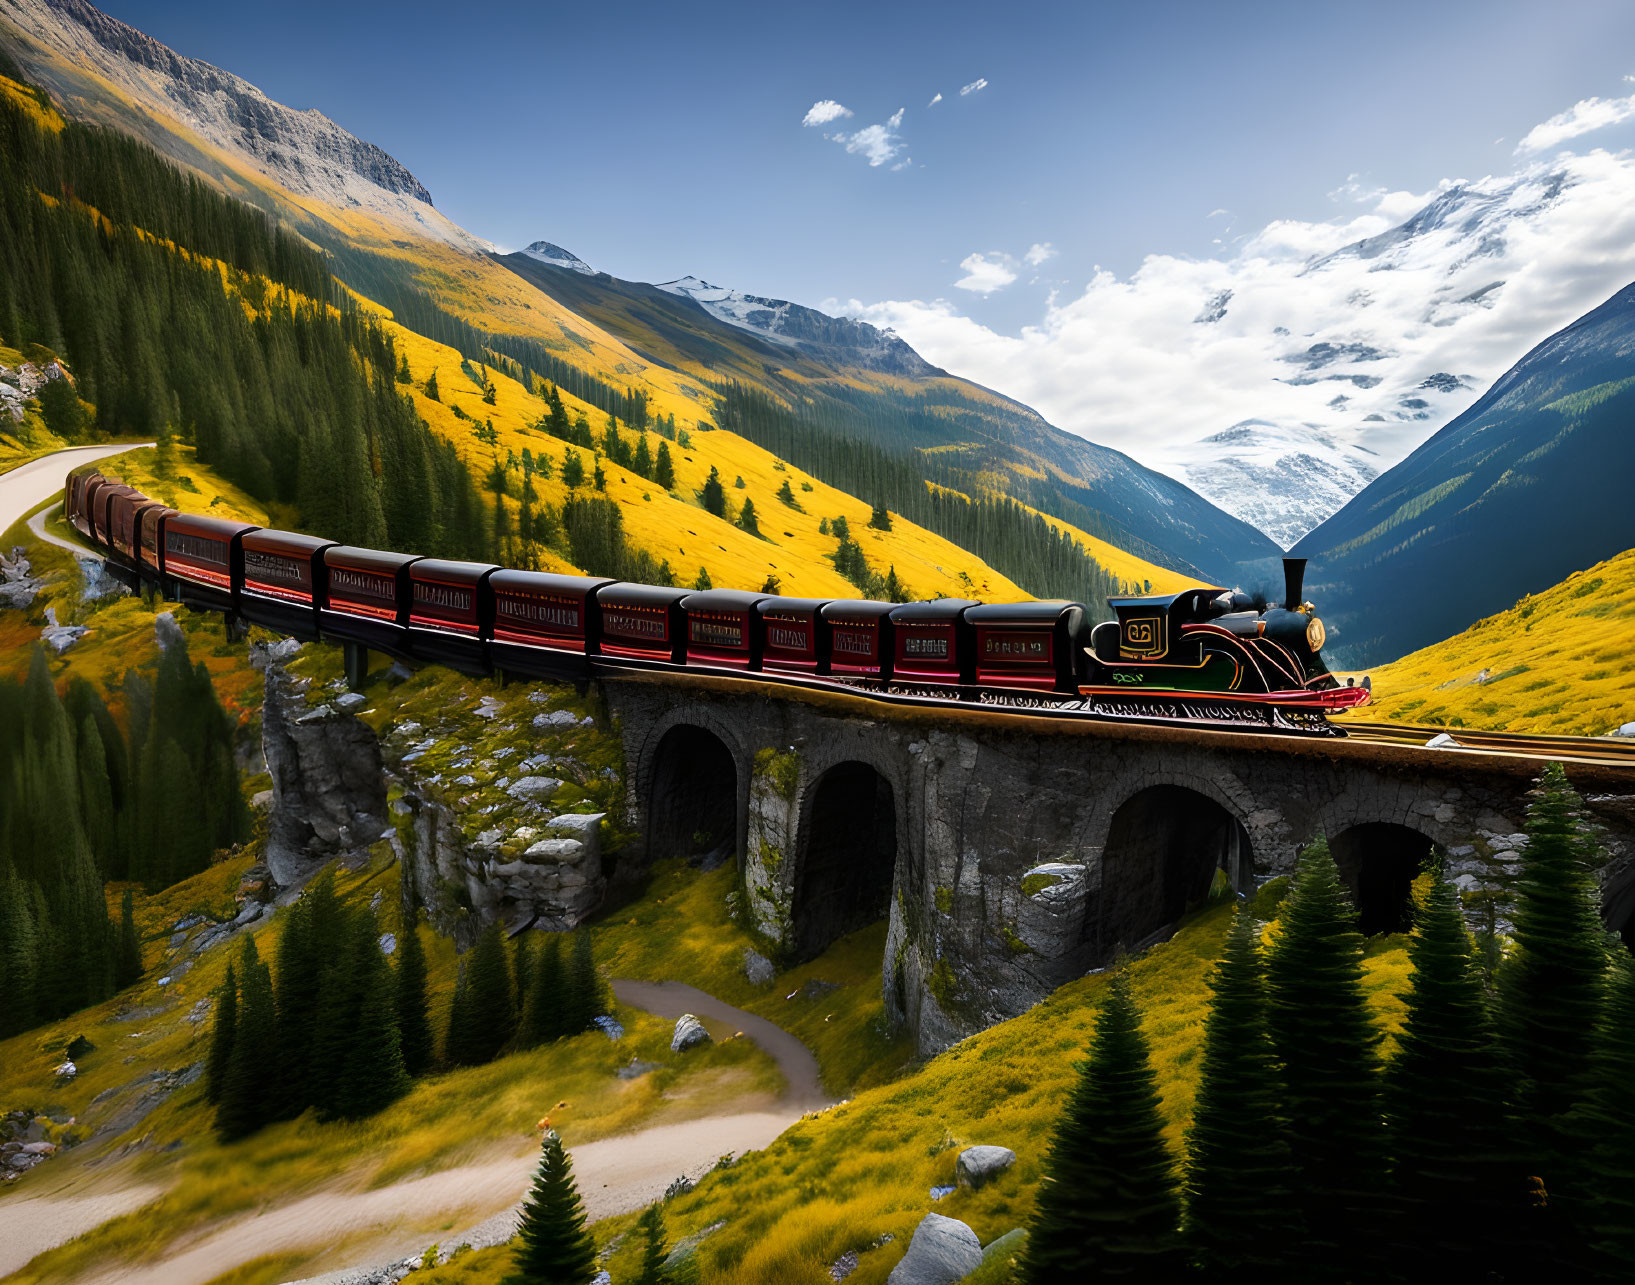 Vintage red train crossing stone bridge in mountain landscape with pine trees and autumn foliage under blue sky